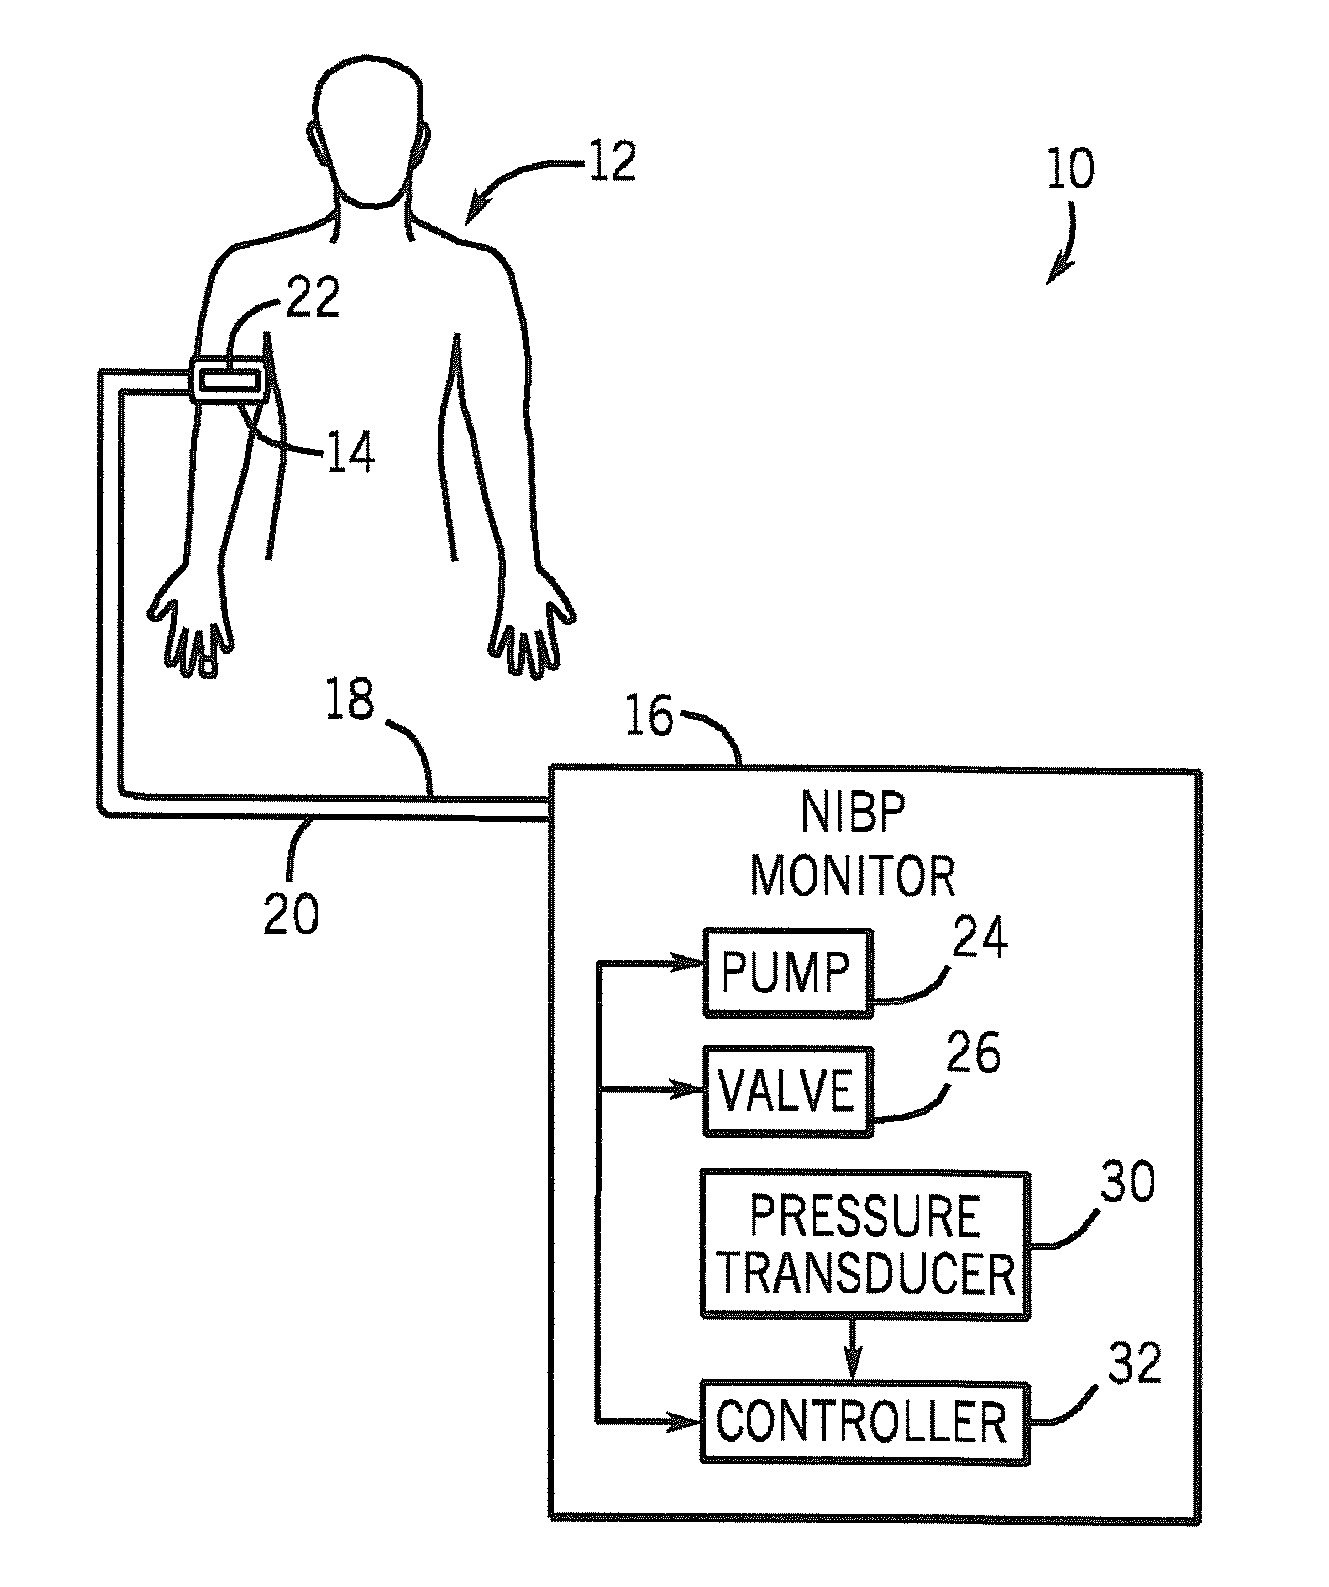 Blood pressure cuff apparatus and system